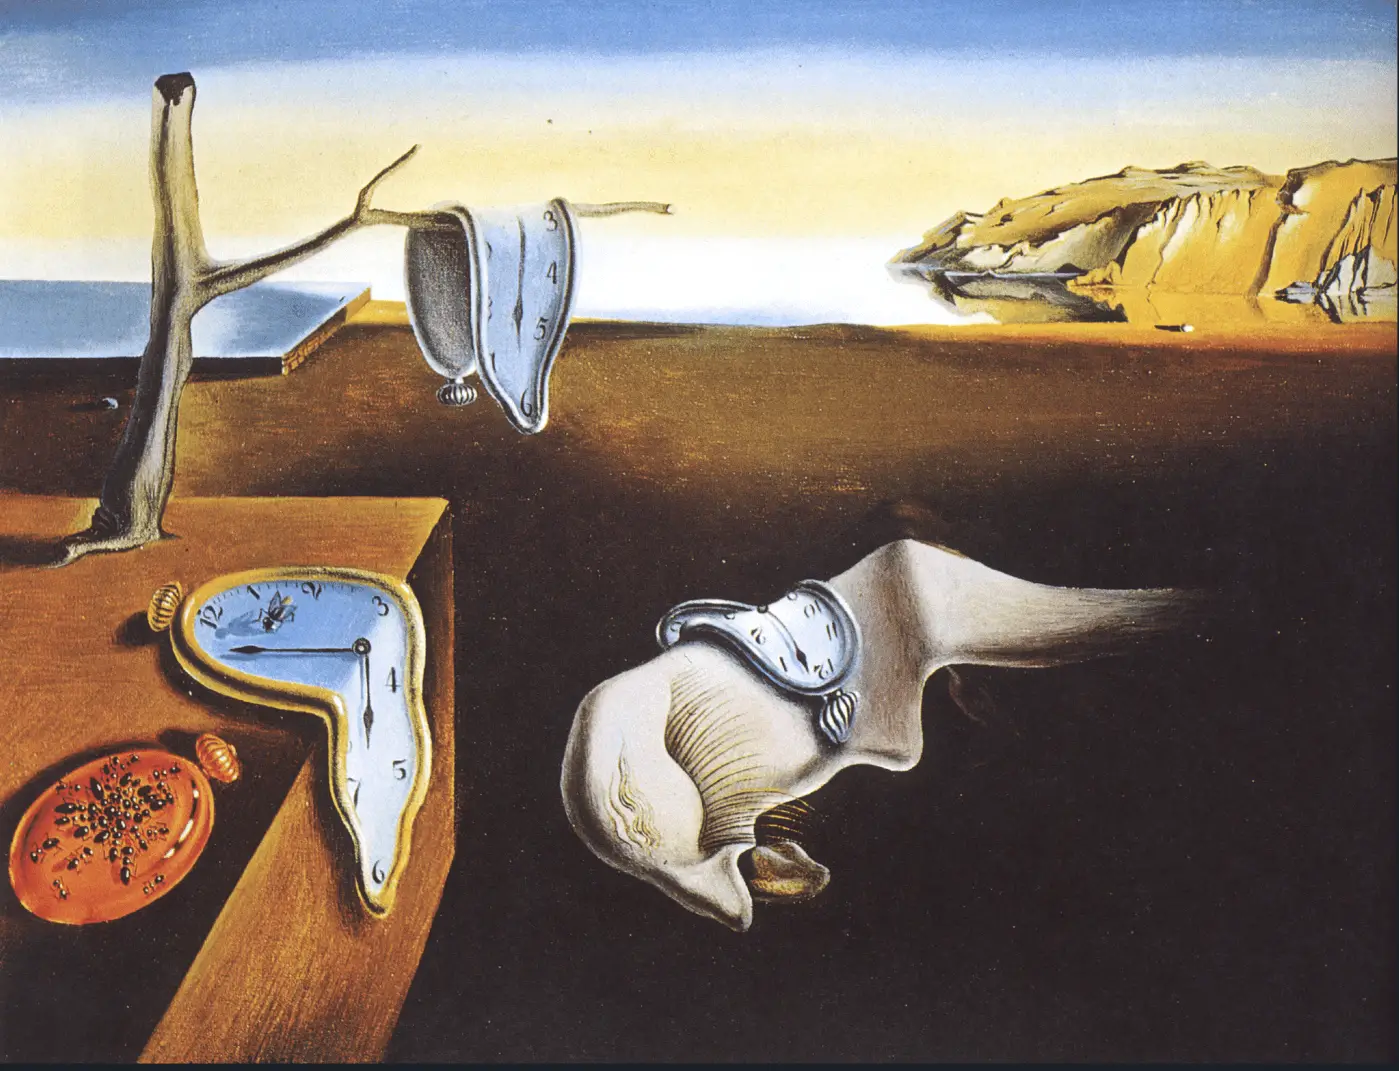 The Persistence of Memory, by Salvador Dali in 1931